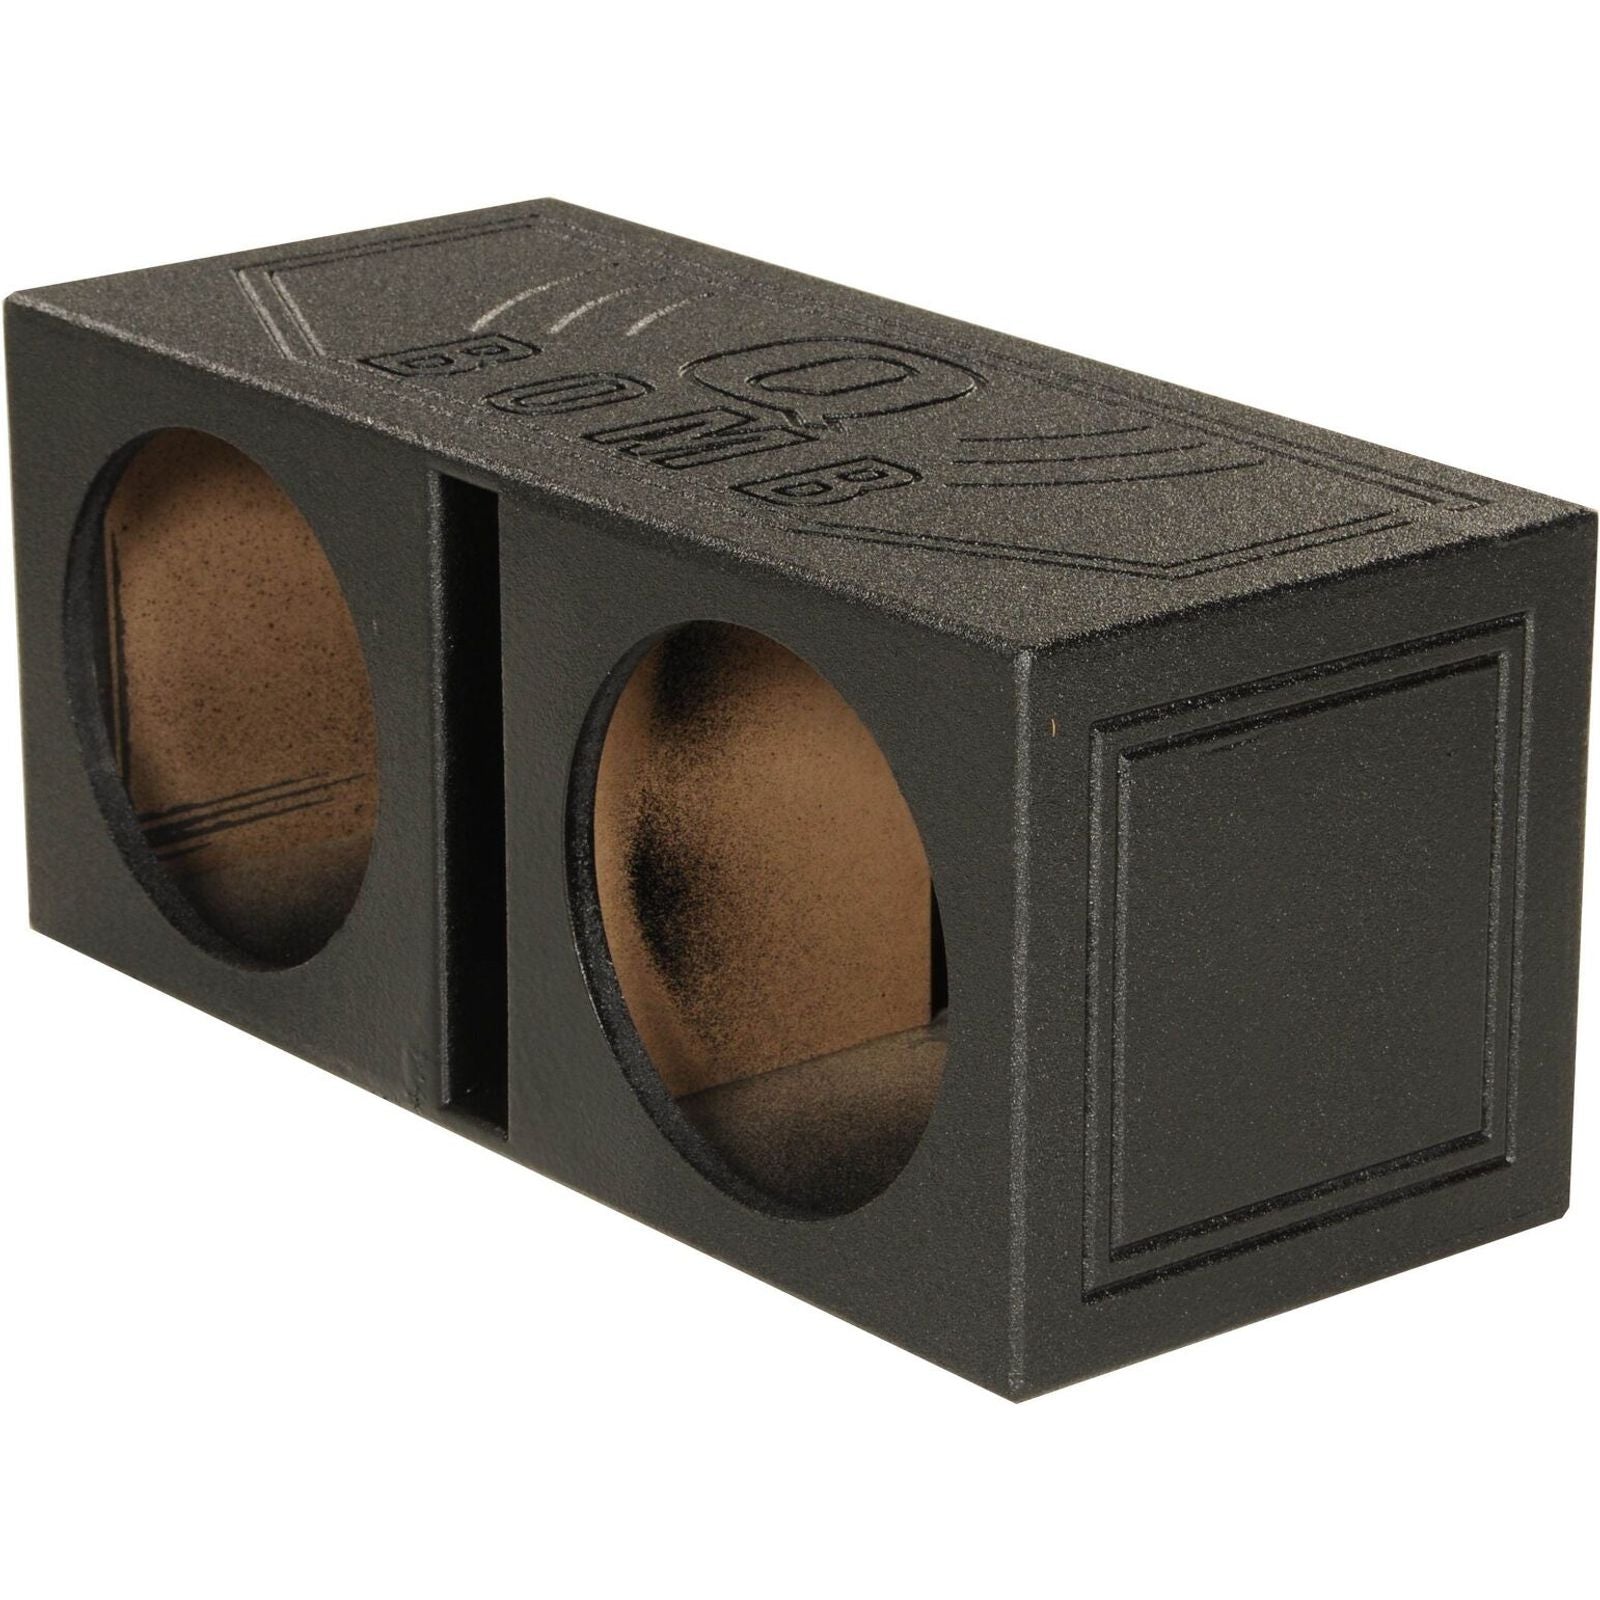 QPower QBOMB15V Dual 15" Vented Speaker Box from High Grade MDF Wood with Durable Bed Liner Spray